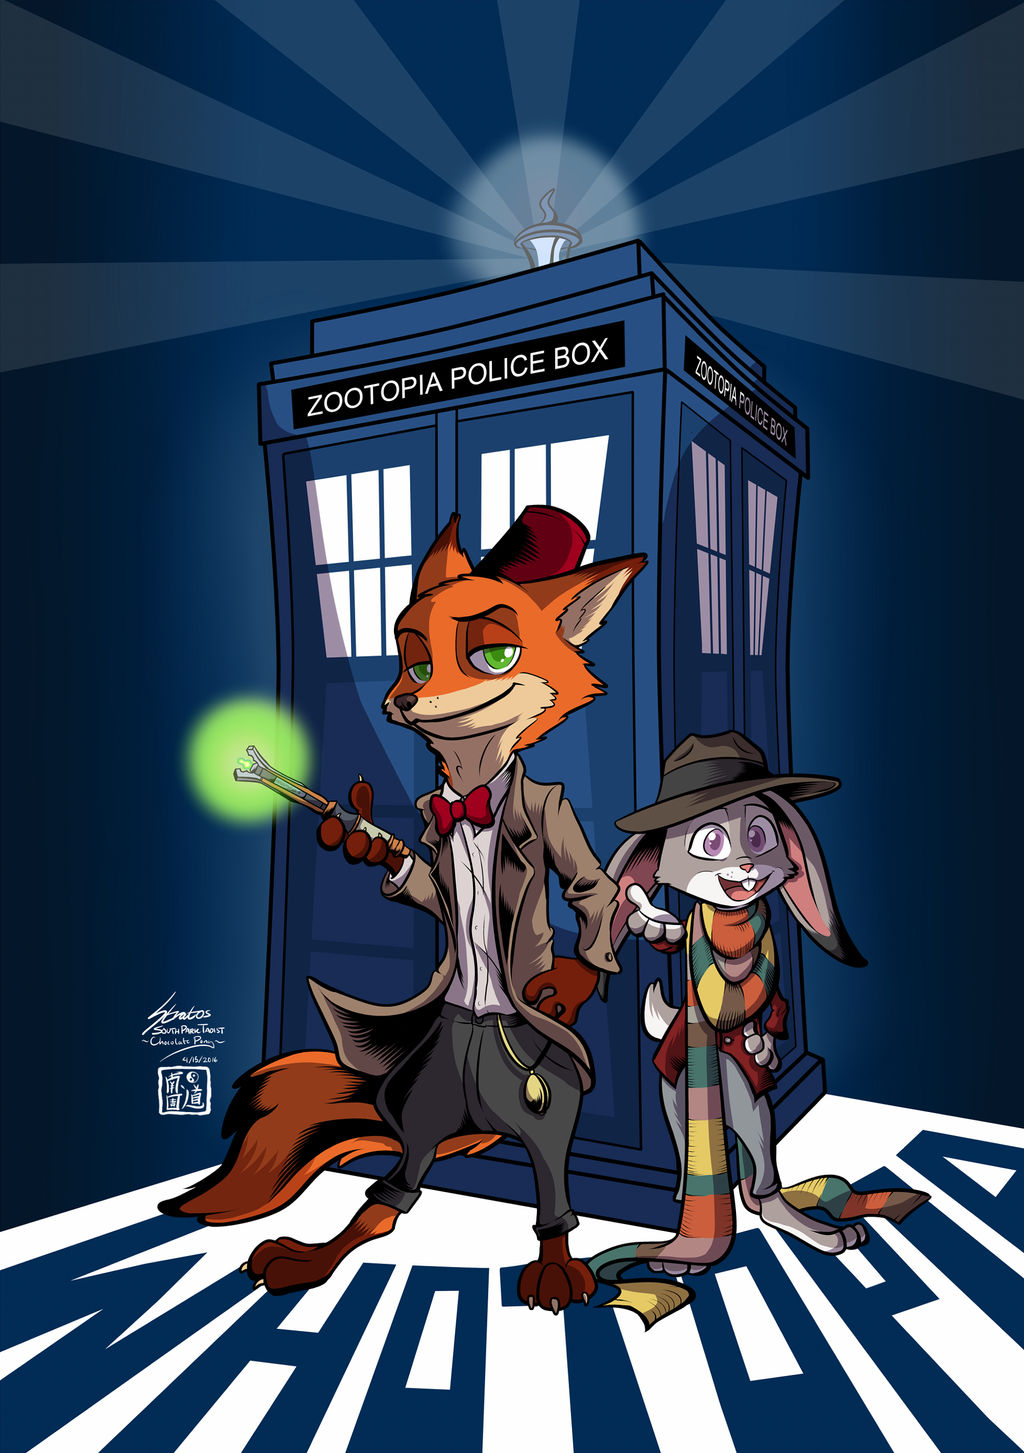 Doctor Zoo in Whotopia